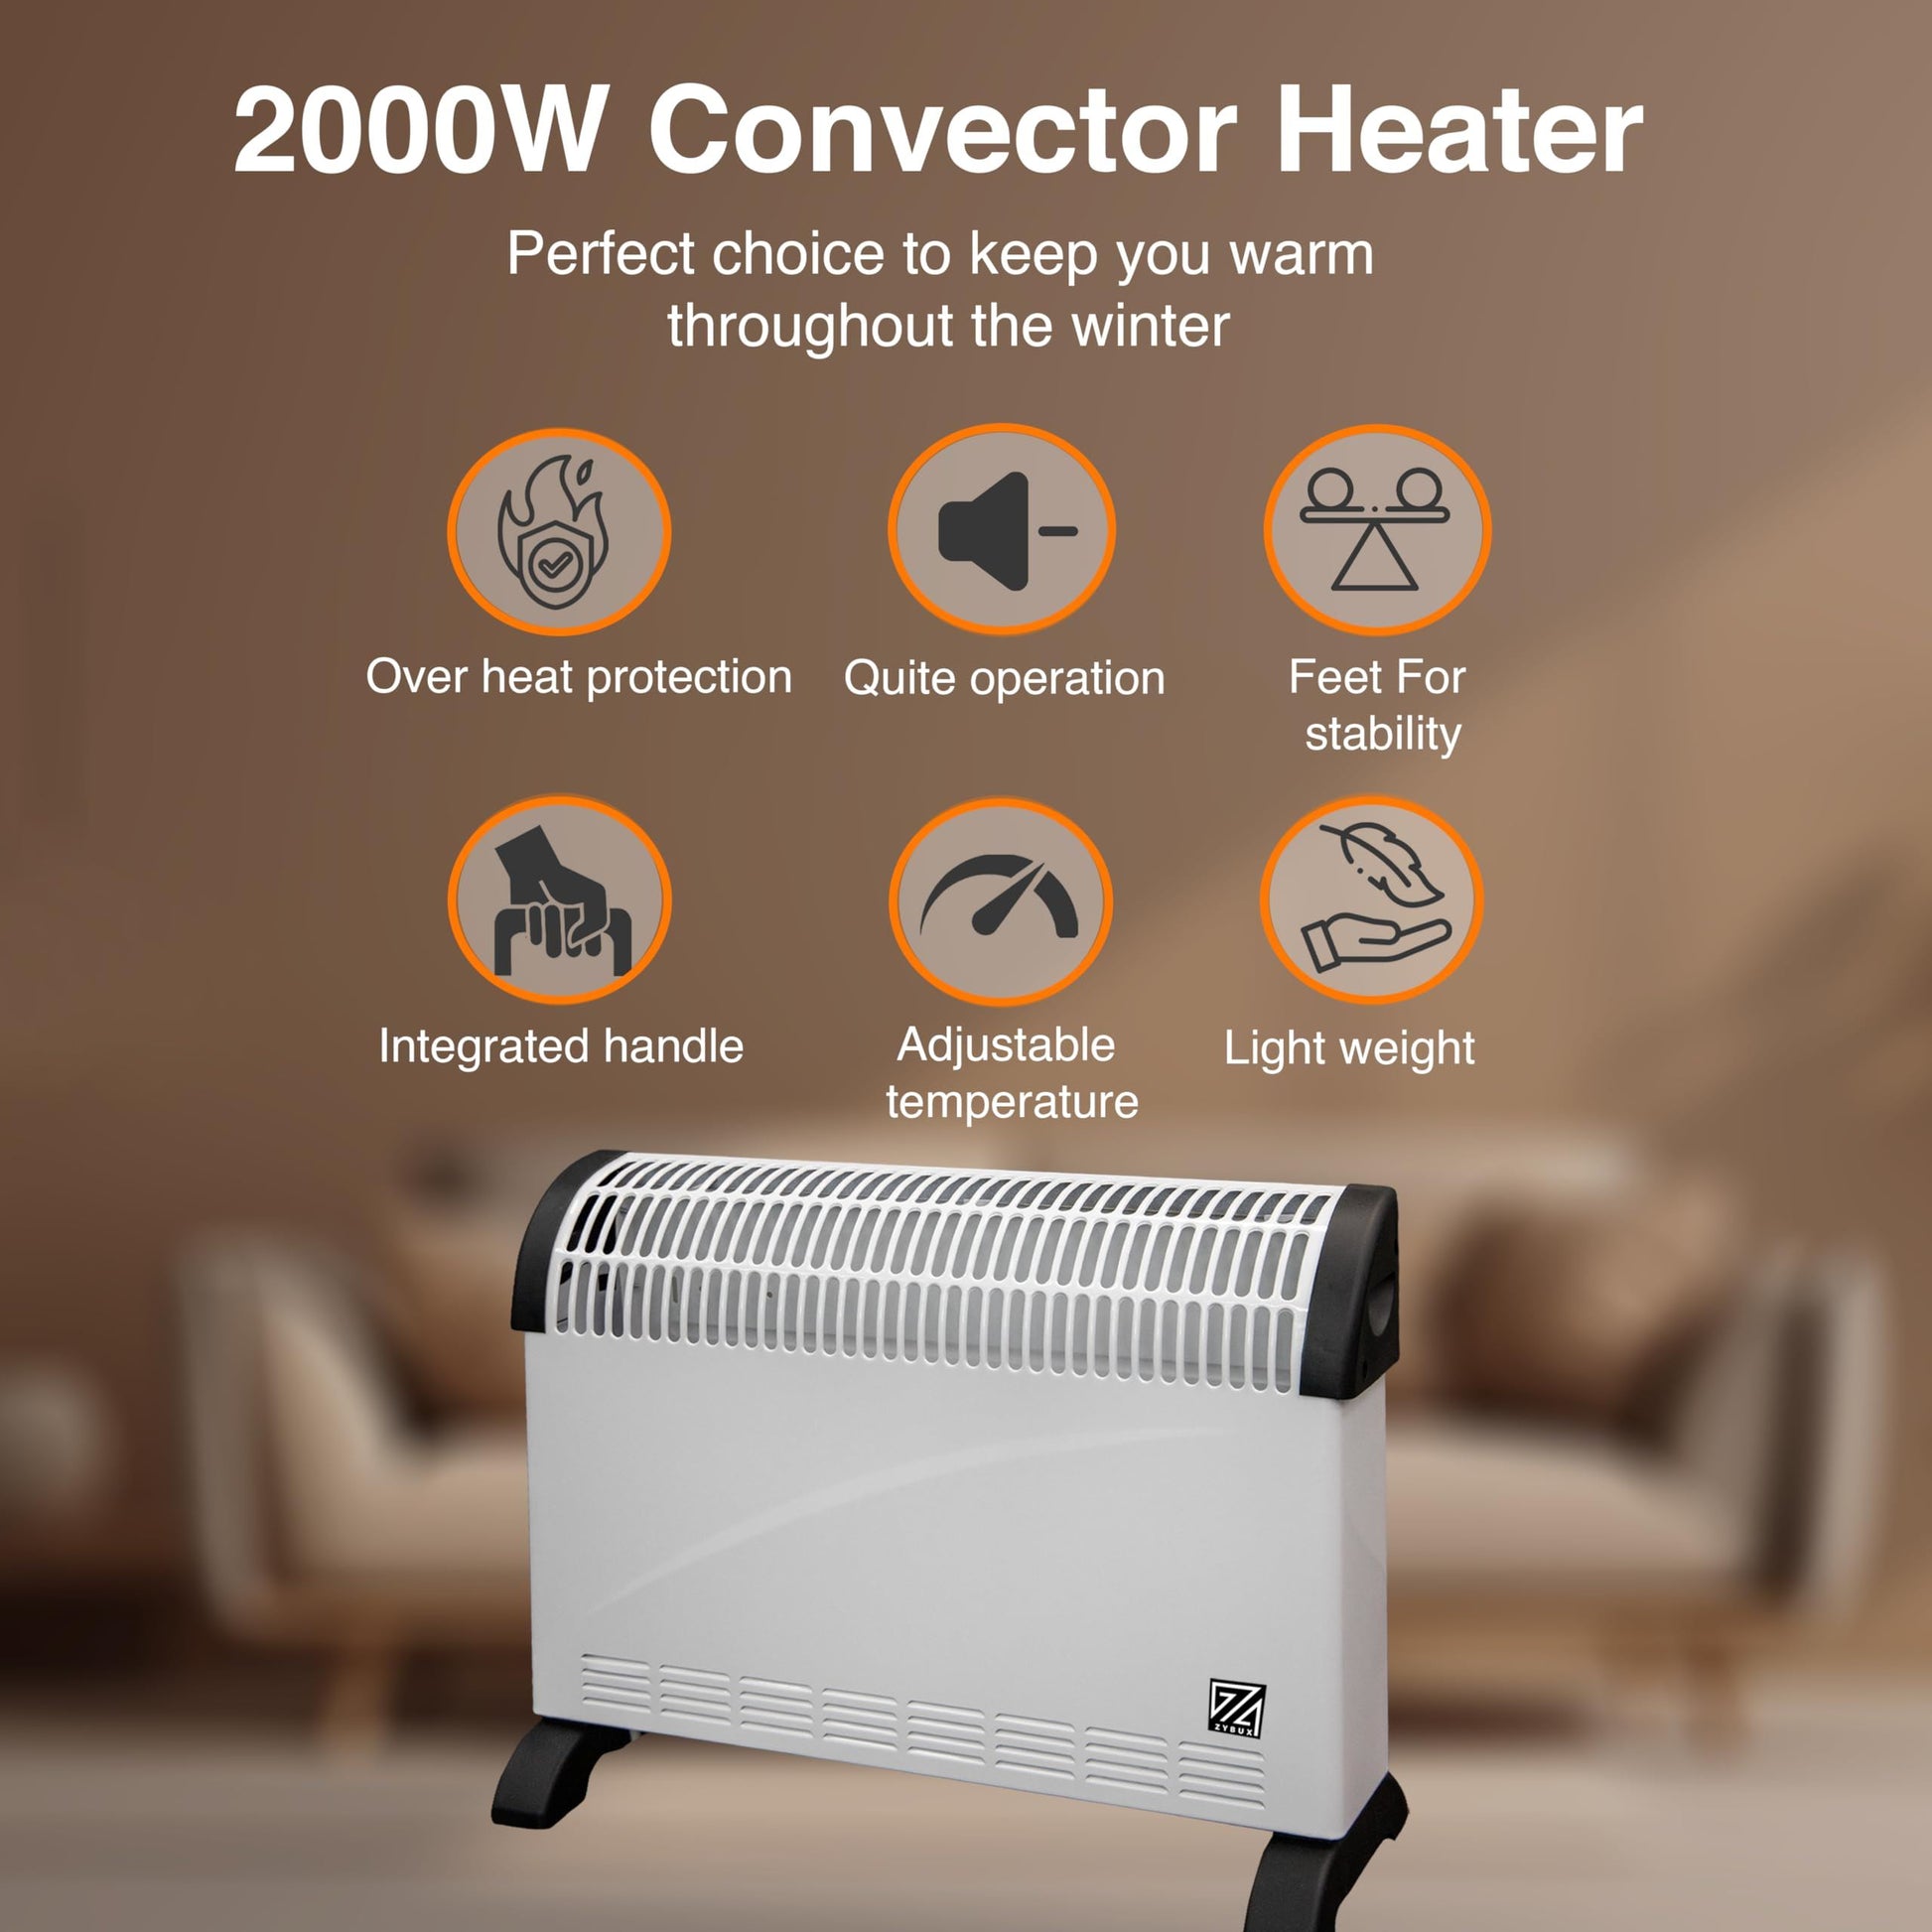 ZYBUX - 2000W Convection Heater, Electric Convector Radiator Heater 